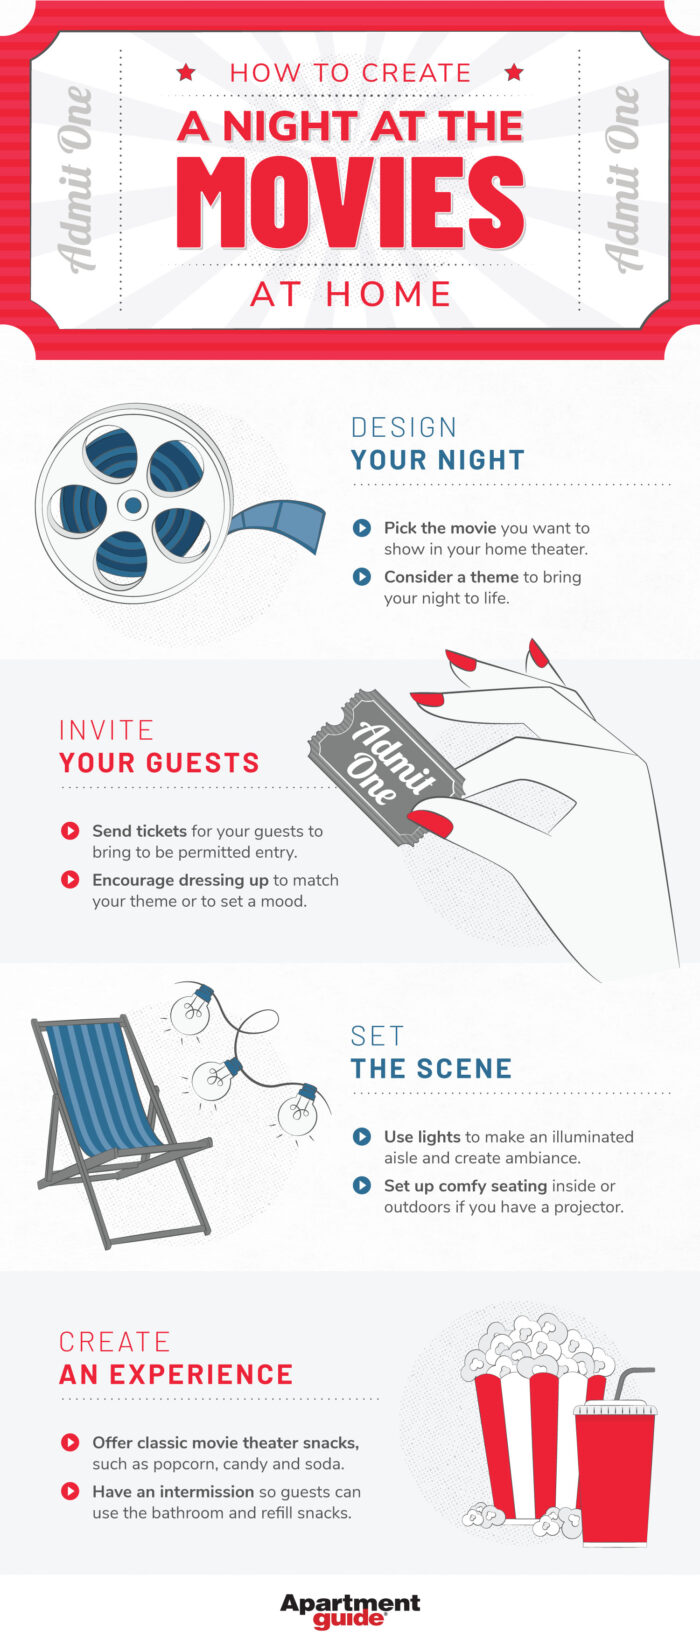 8 Easy Ways to Put Together a Family Movie Night Your Kids Won’t Forget